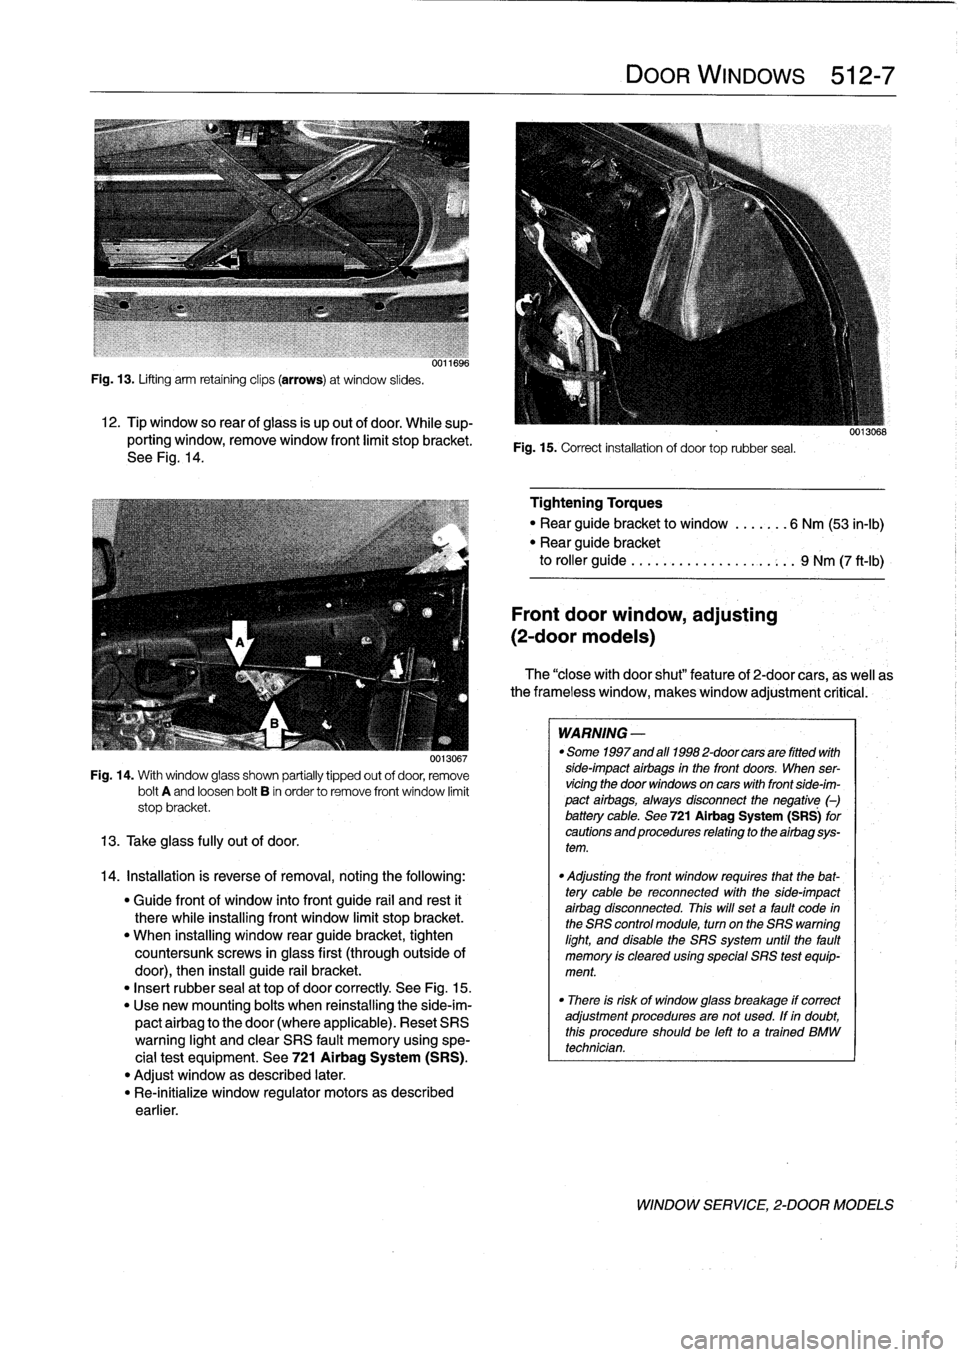 BMW 328i 1994 E36 Workshop Manual 
Fig
.
13
.
Lifting
arm
retaining
clips
(arrows)
at
window
slides
.

12
.
Tip
window
so
rear
ofglass
is
up
out
of
door
.
While
sup-
porting
window,
remove
window
front
limit
stopbracket
.
See
Fig
.
14